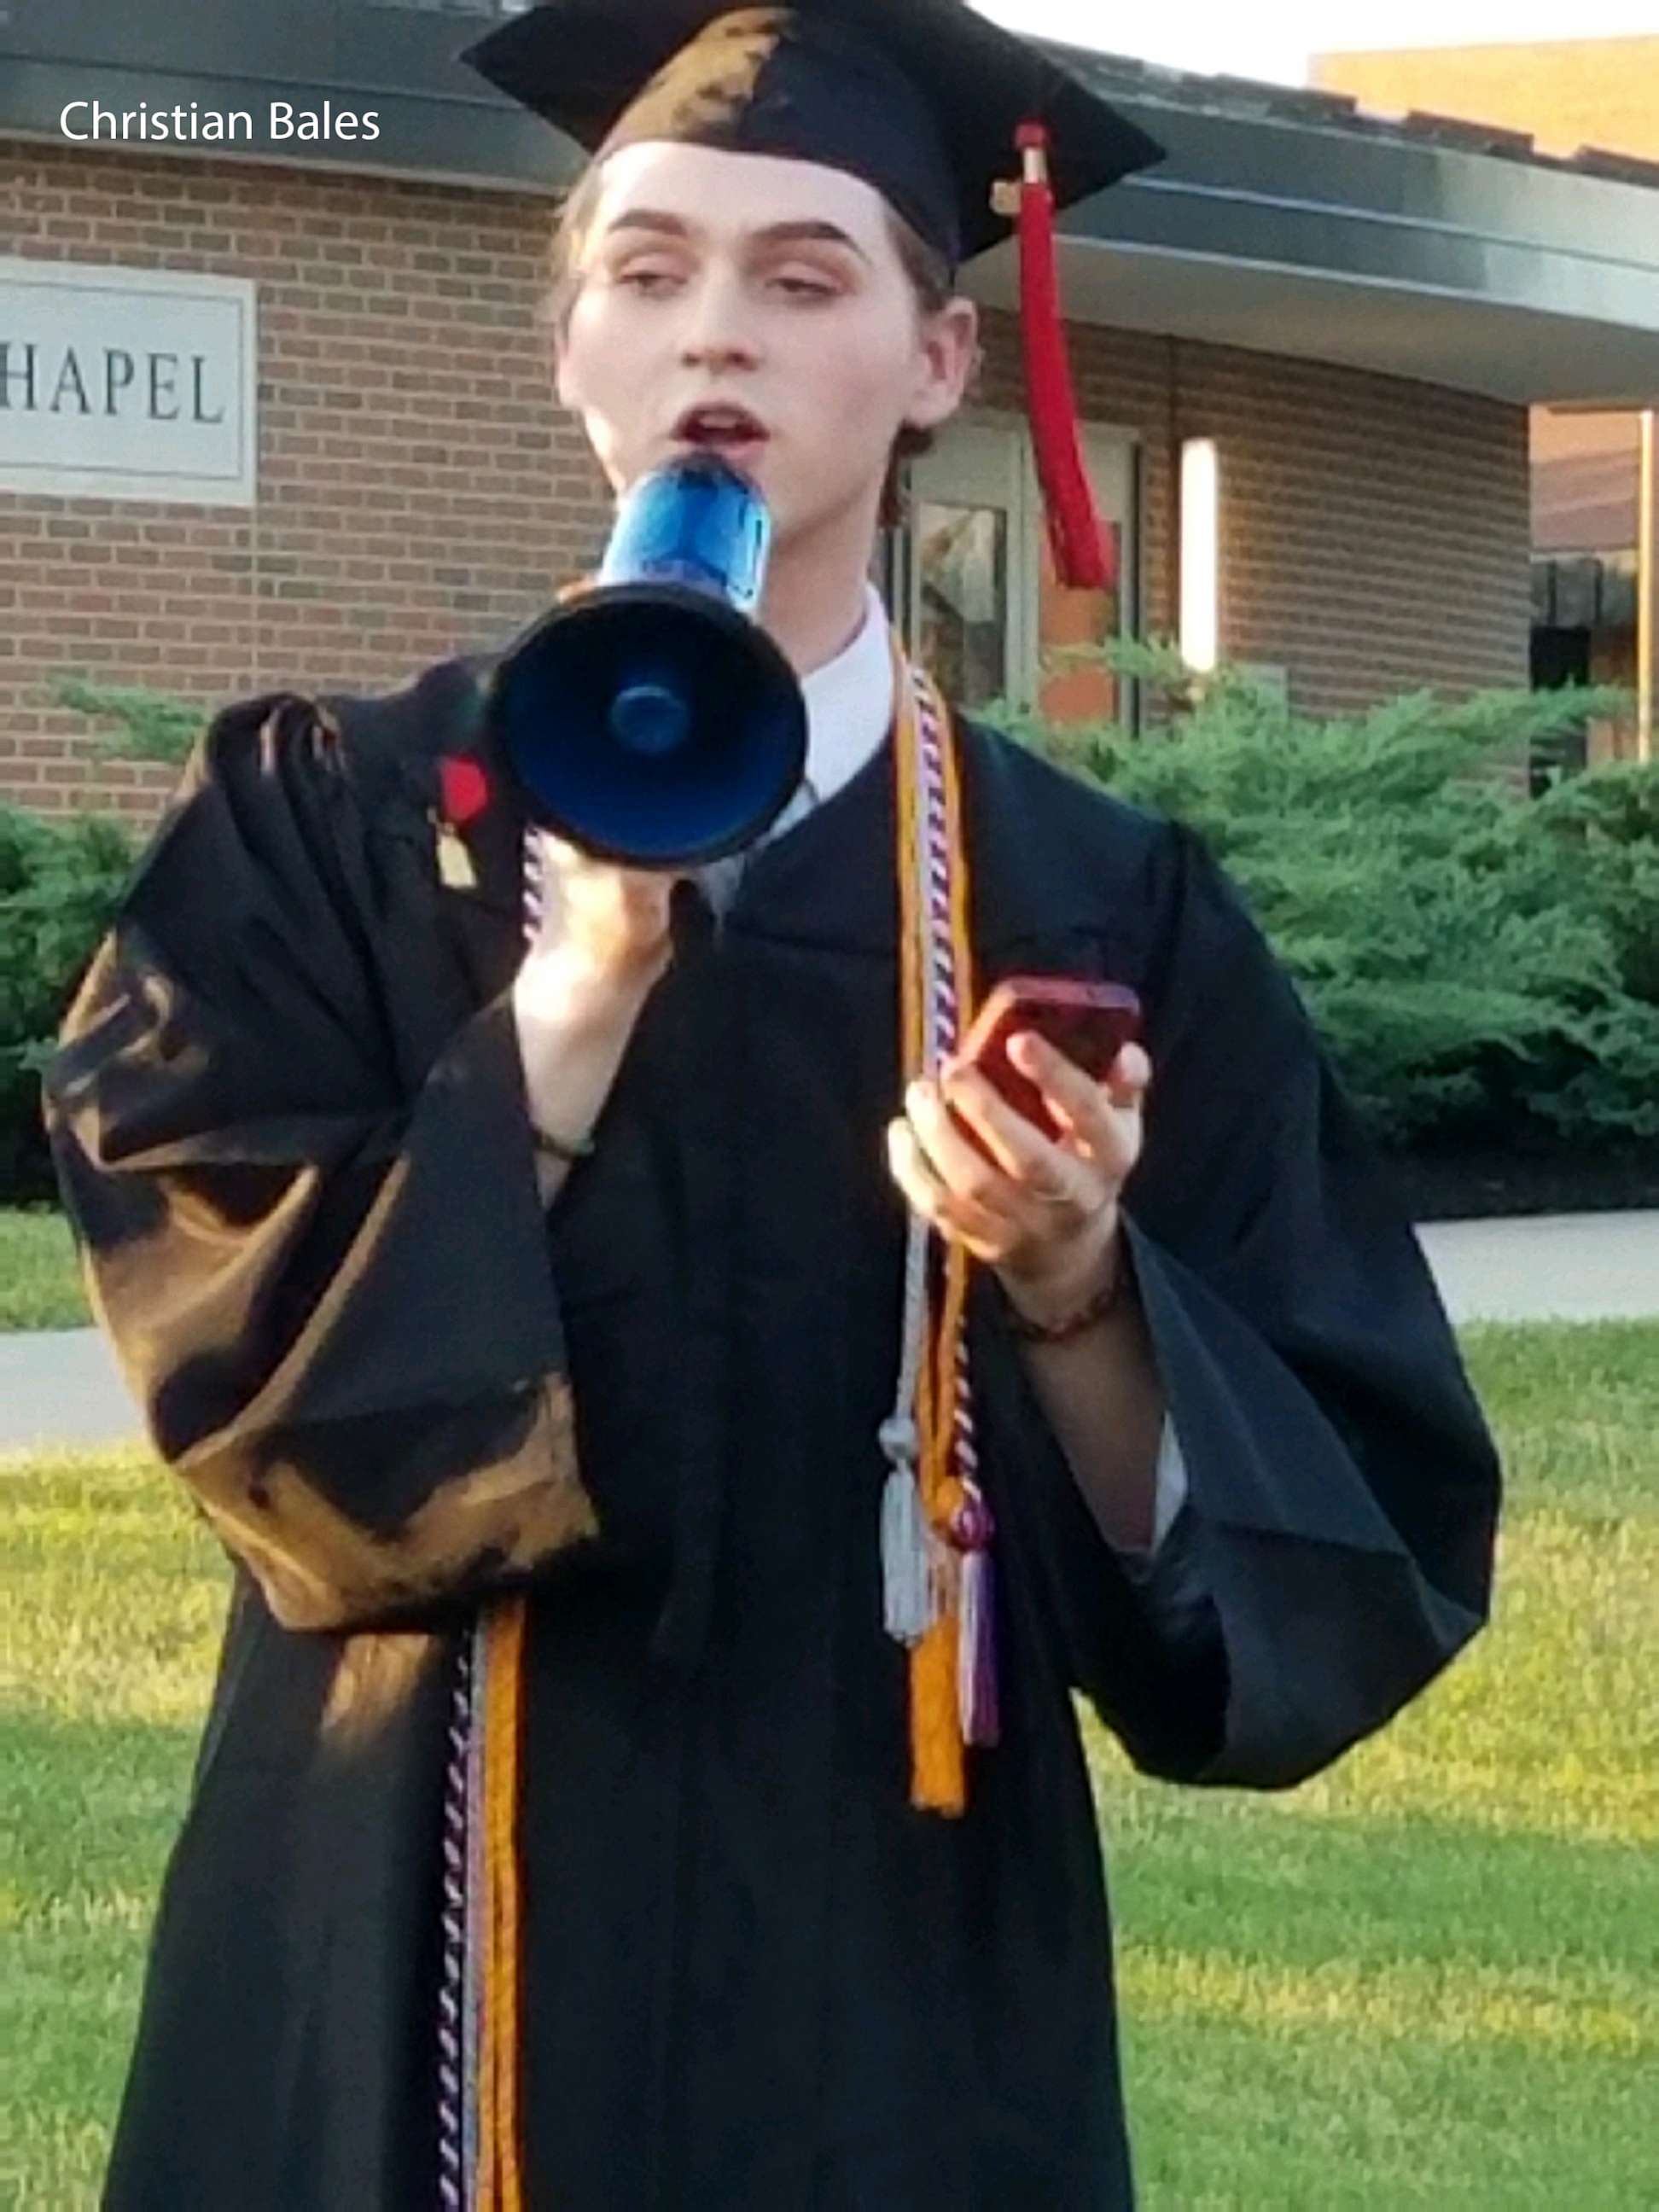 PHOTO: Holy Cross High School's graduating valedictorian and student council president Christian Bales delivers his speech outside after the ceremony, May 25, 2018, in Covington, Ky.